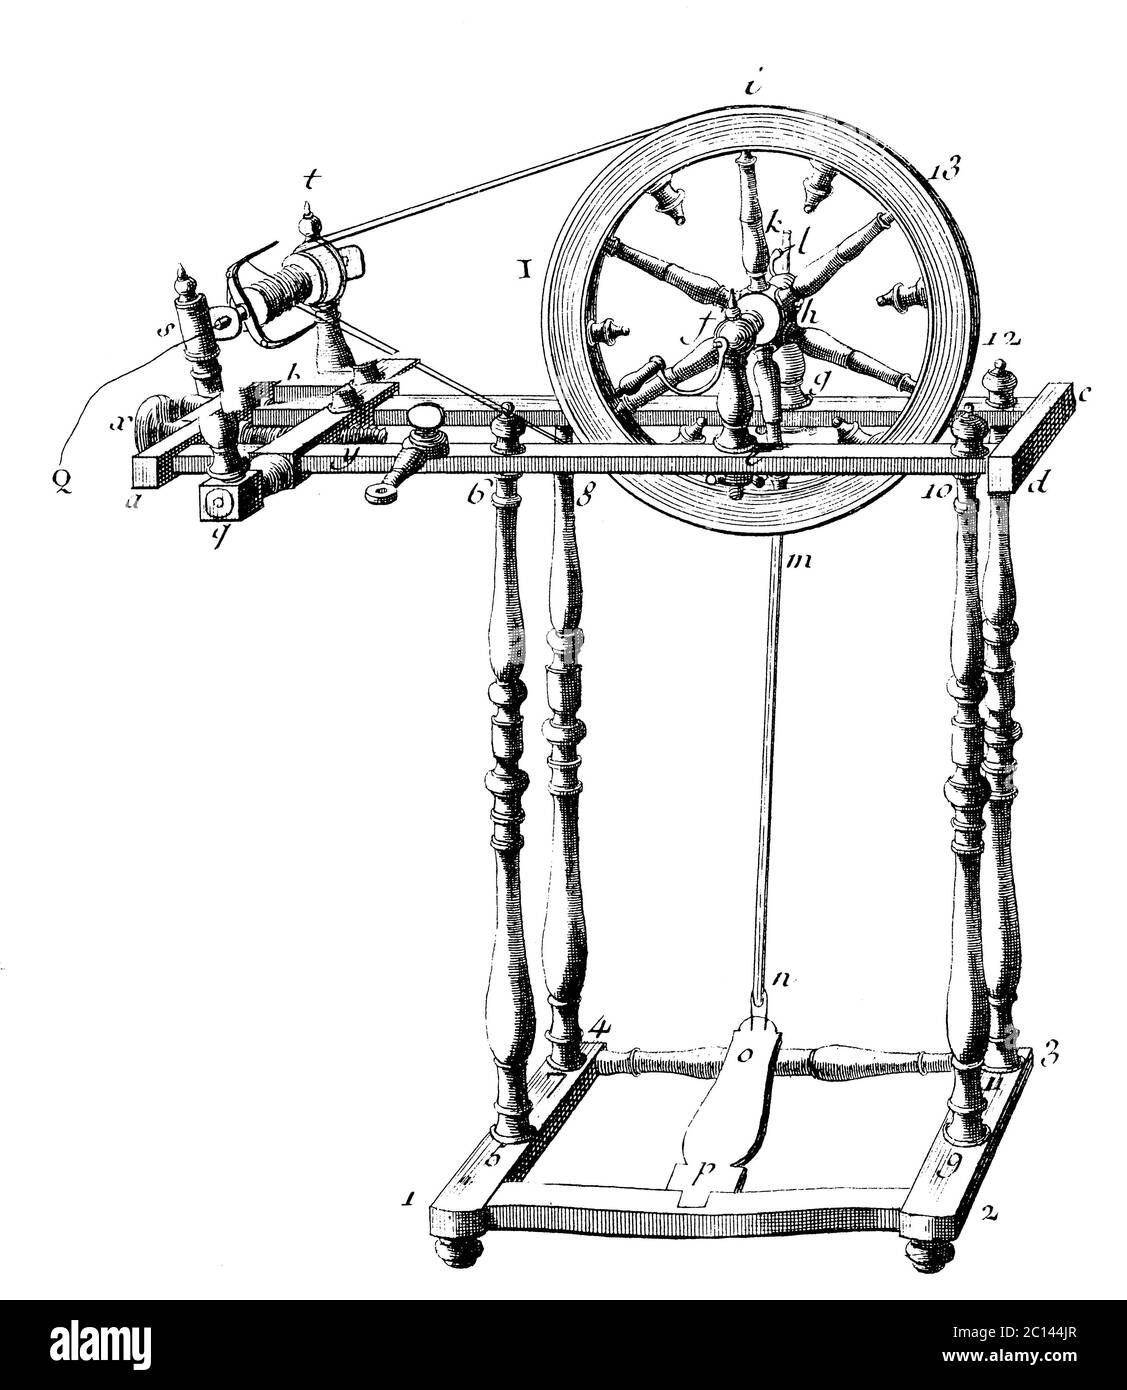 Antique illustration of a spinning wheel. Published in 'A Diderot Pictorial Encyclopedia of Trades and Industry. Manufacturing and the Technical Arts Stock Photo